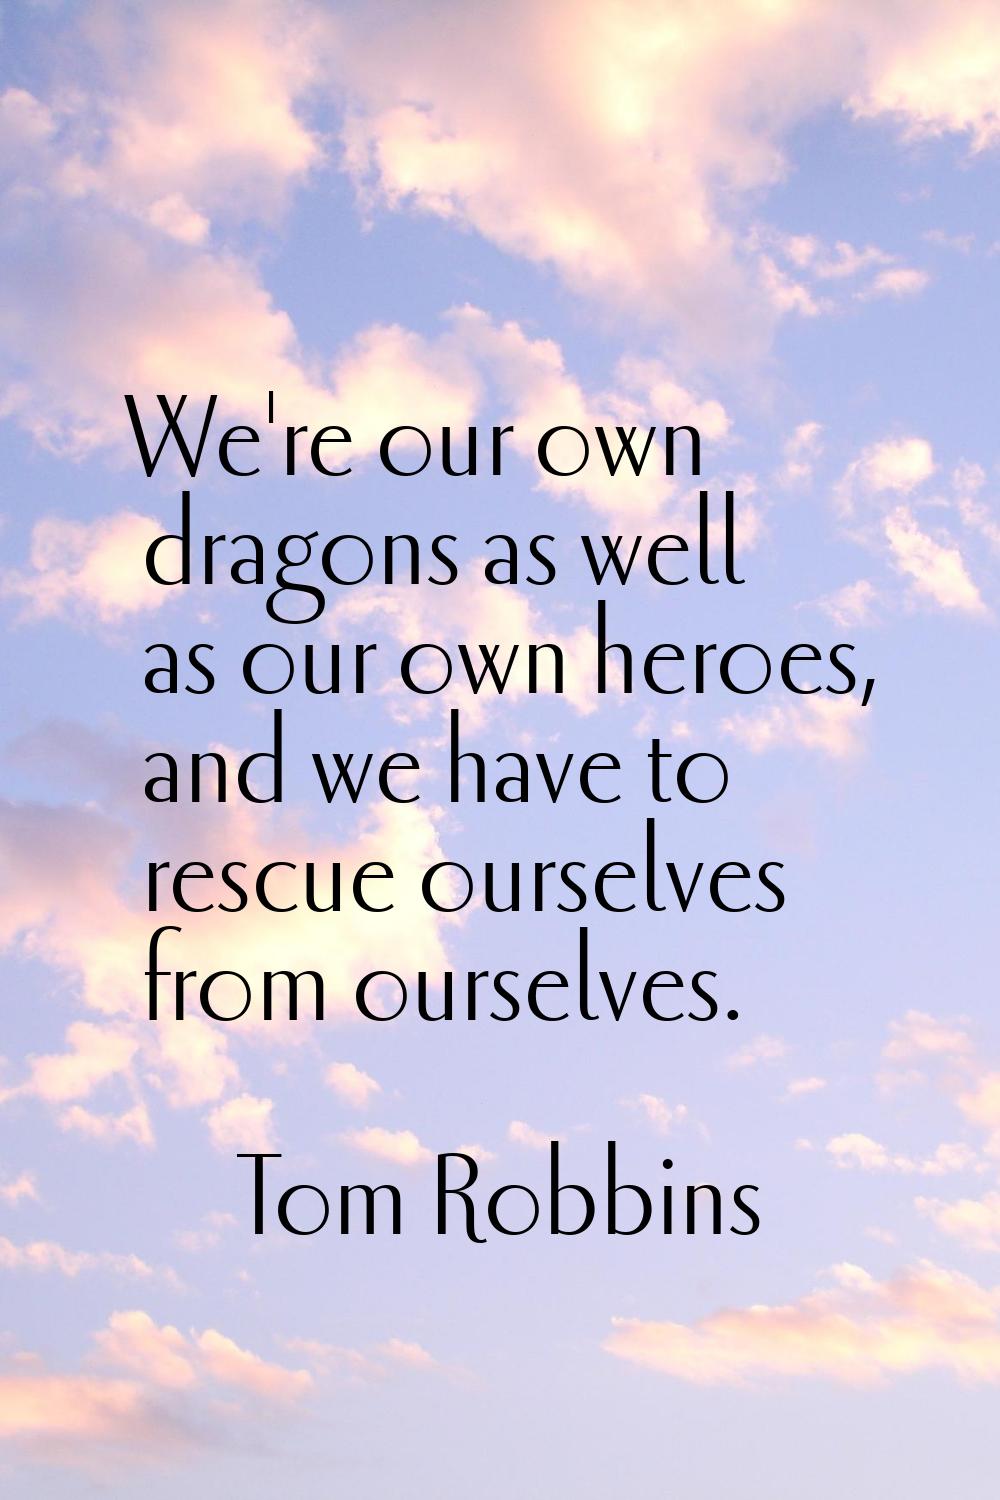 We're our own dragons as well as our own heroes, and we have to rescue ourselves from ourselves.